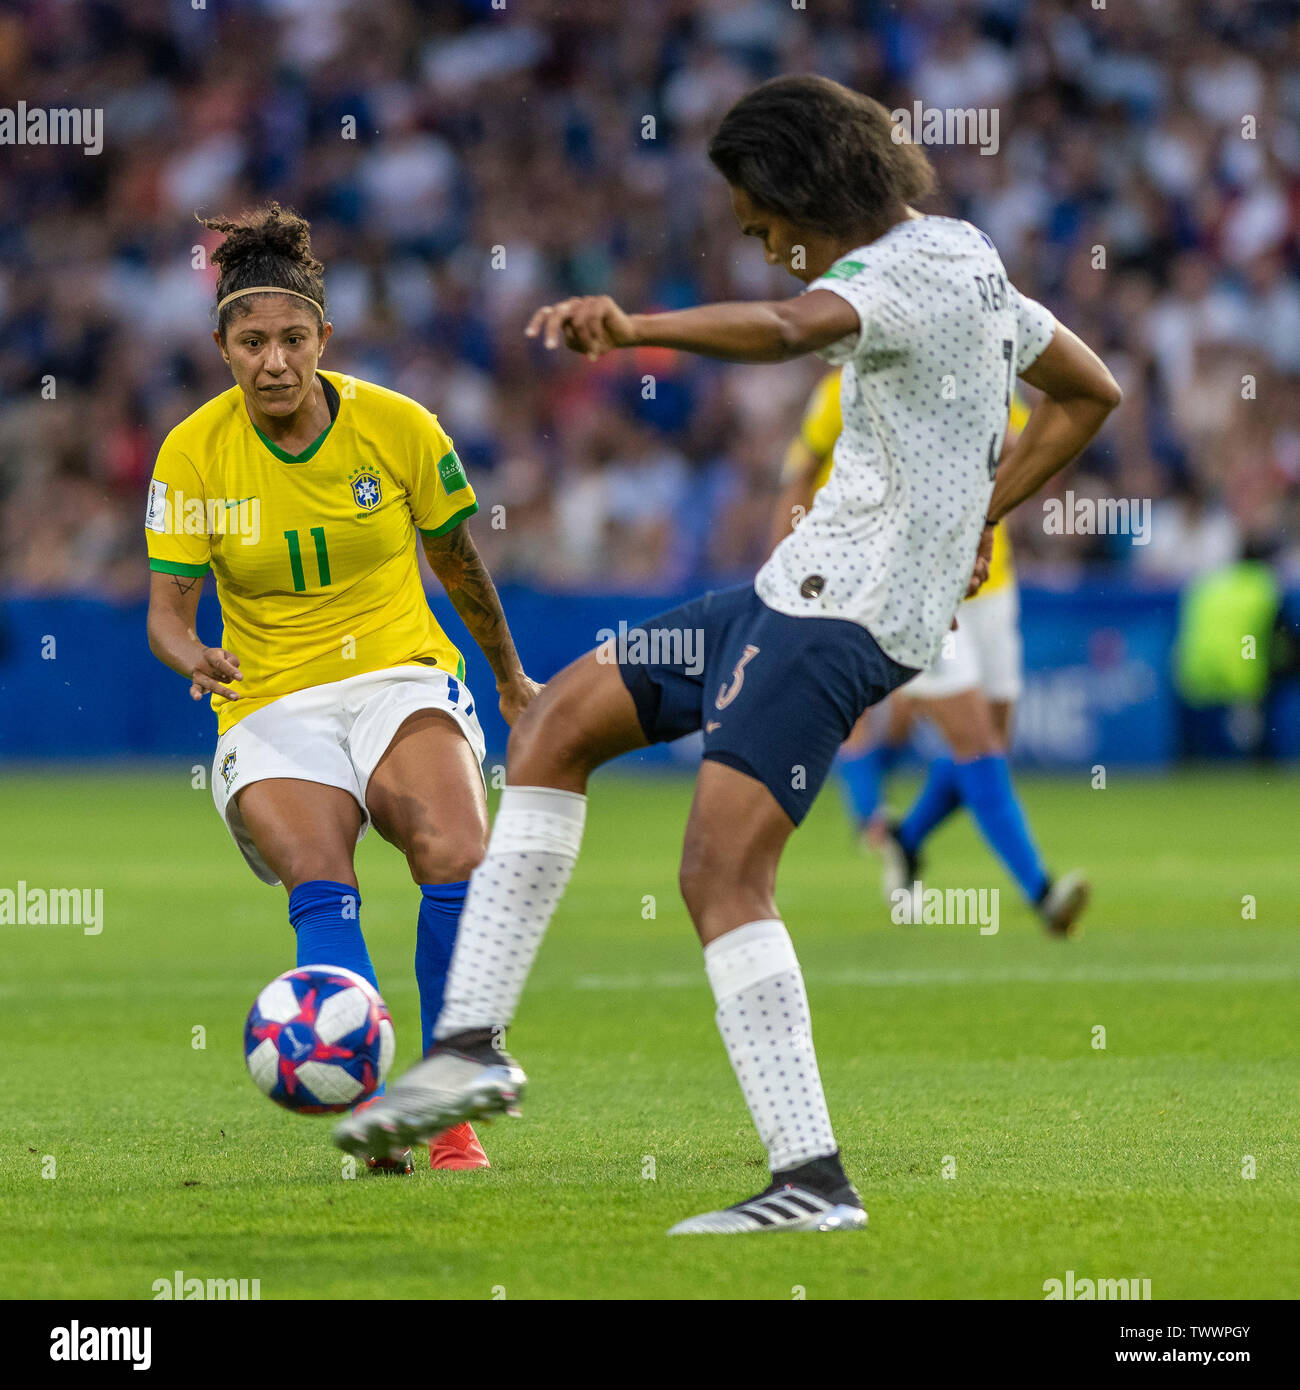 Le Havre, France. 23rd June, 2019. FRANCE V BRAZIL - Cristiane do Brasil and Wendie Renard of France during a match between Brazil and France. World Cup Qualification Football. FIFA. Held at the Oceane Stadium in Le Havre, France. (Photo: Richard Callis/Fotoarena) Credit: Foto Arena LTDA/Alamy Live News Stock Photo